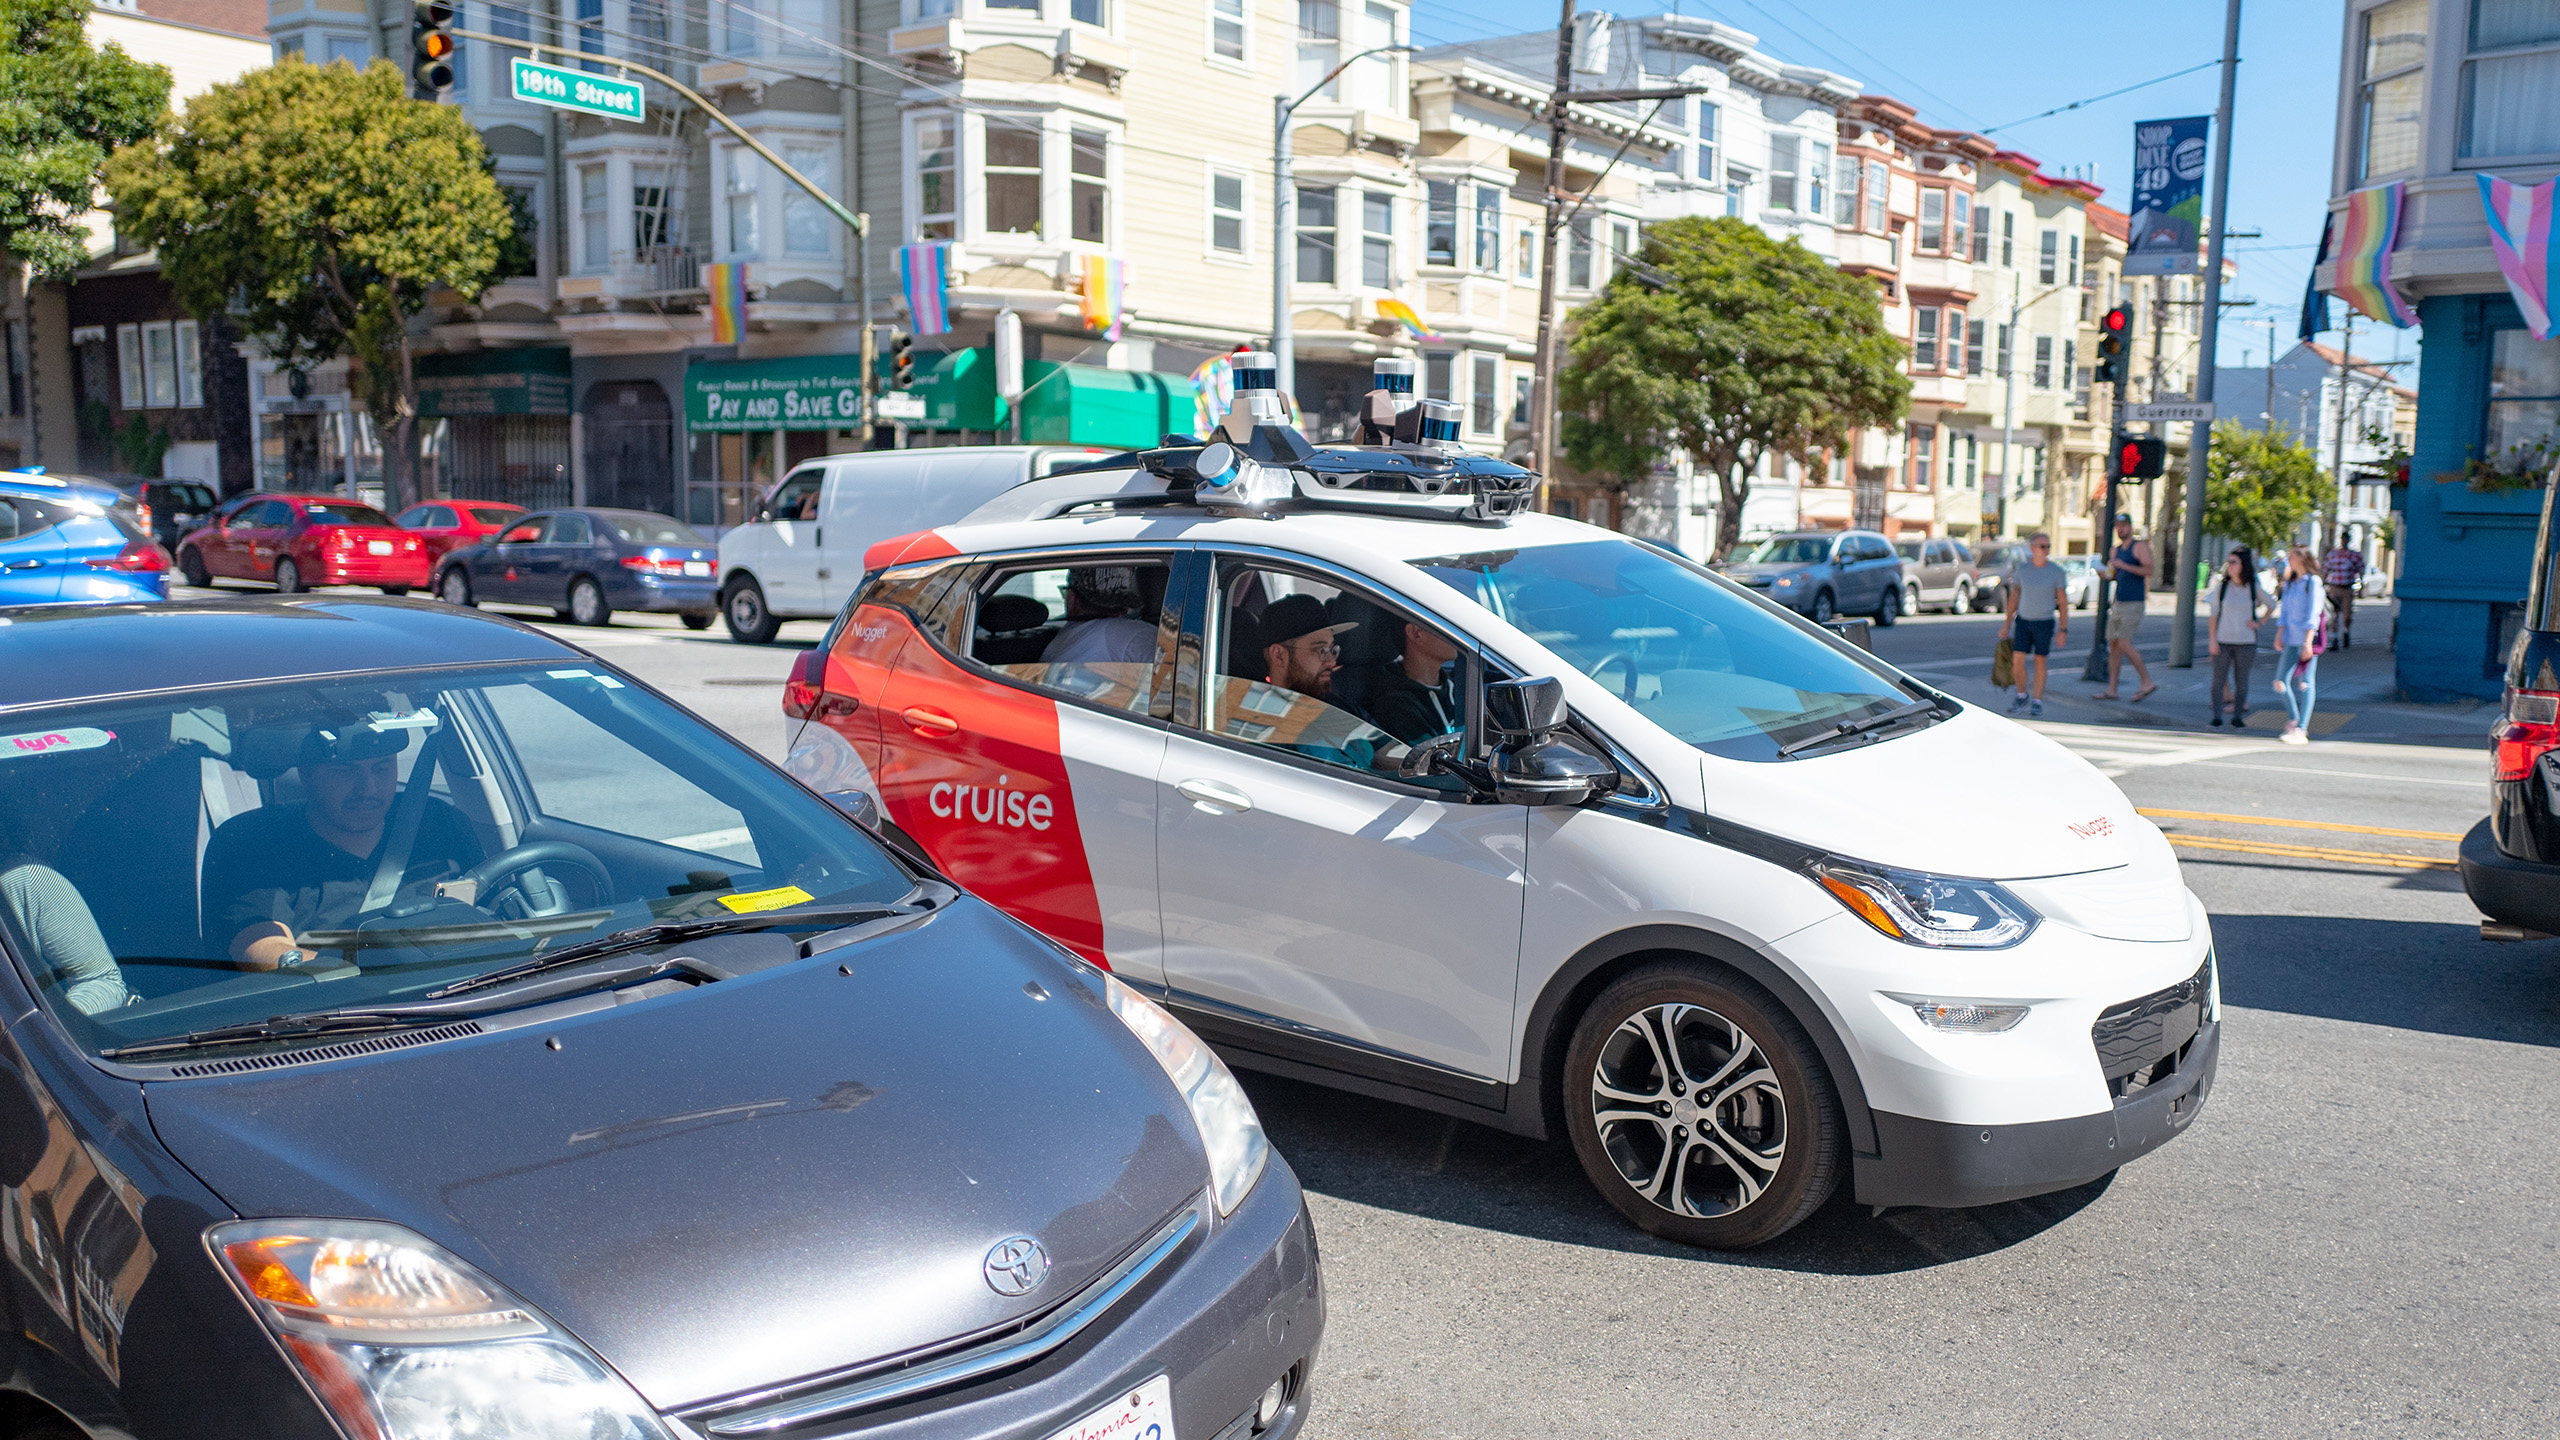 General Motors Cruise self-driving car undergoing testing on the streets of the Mission District neighborhood of San Francisco, California, October 6, 2019.